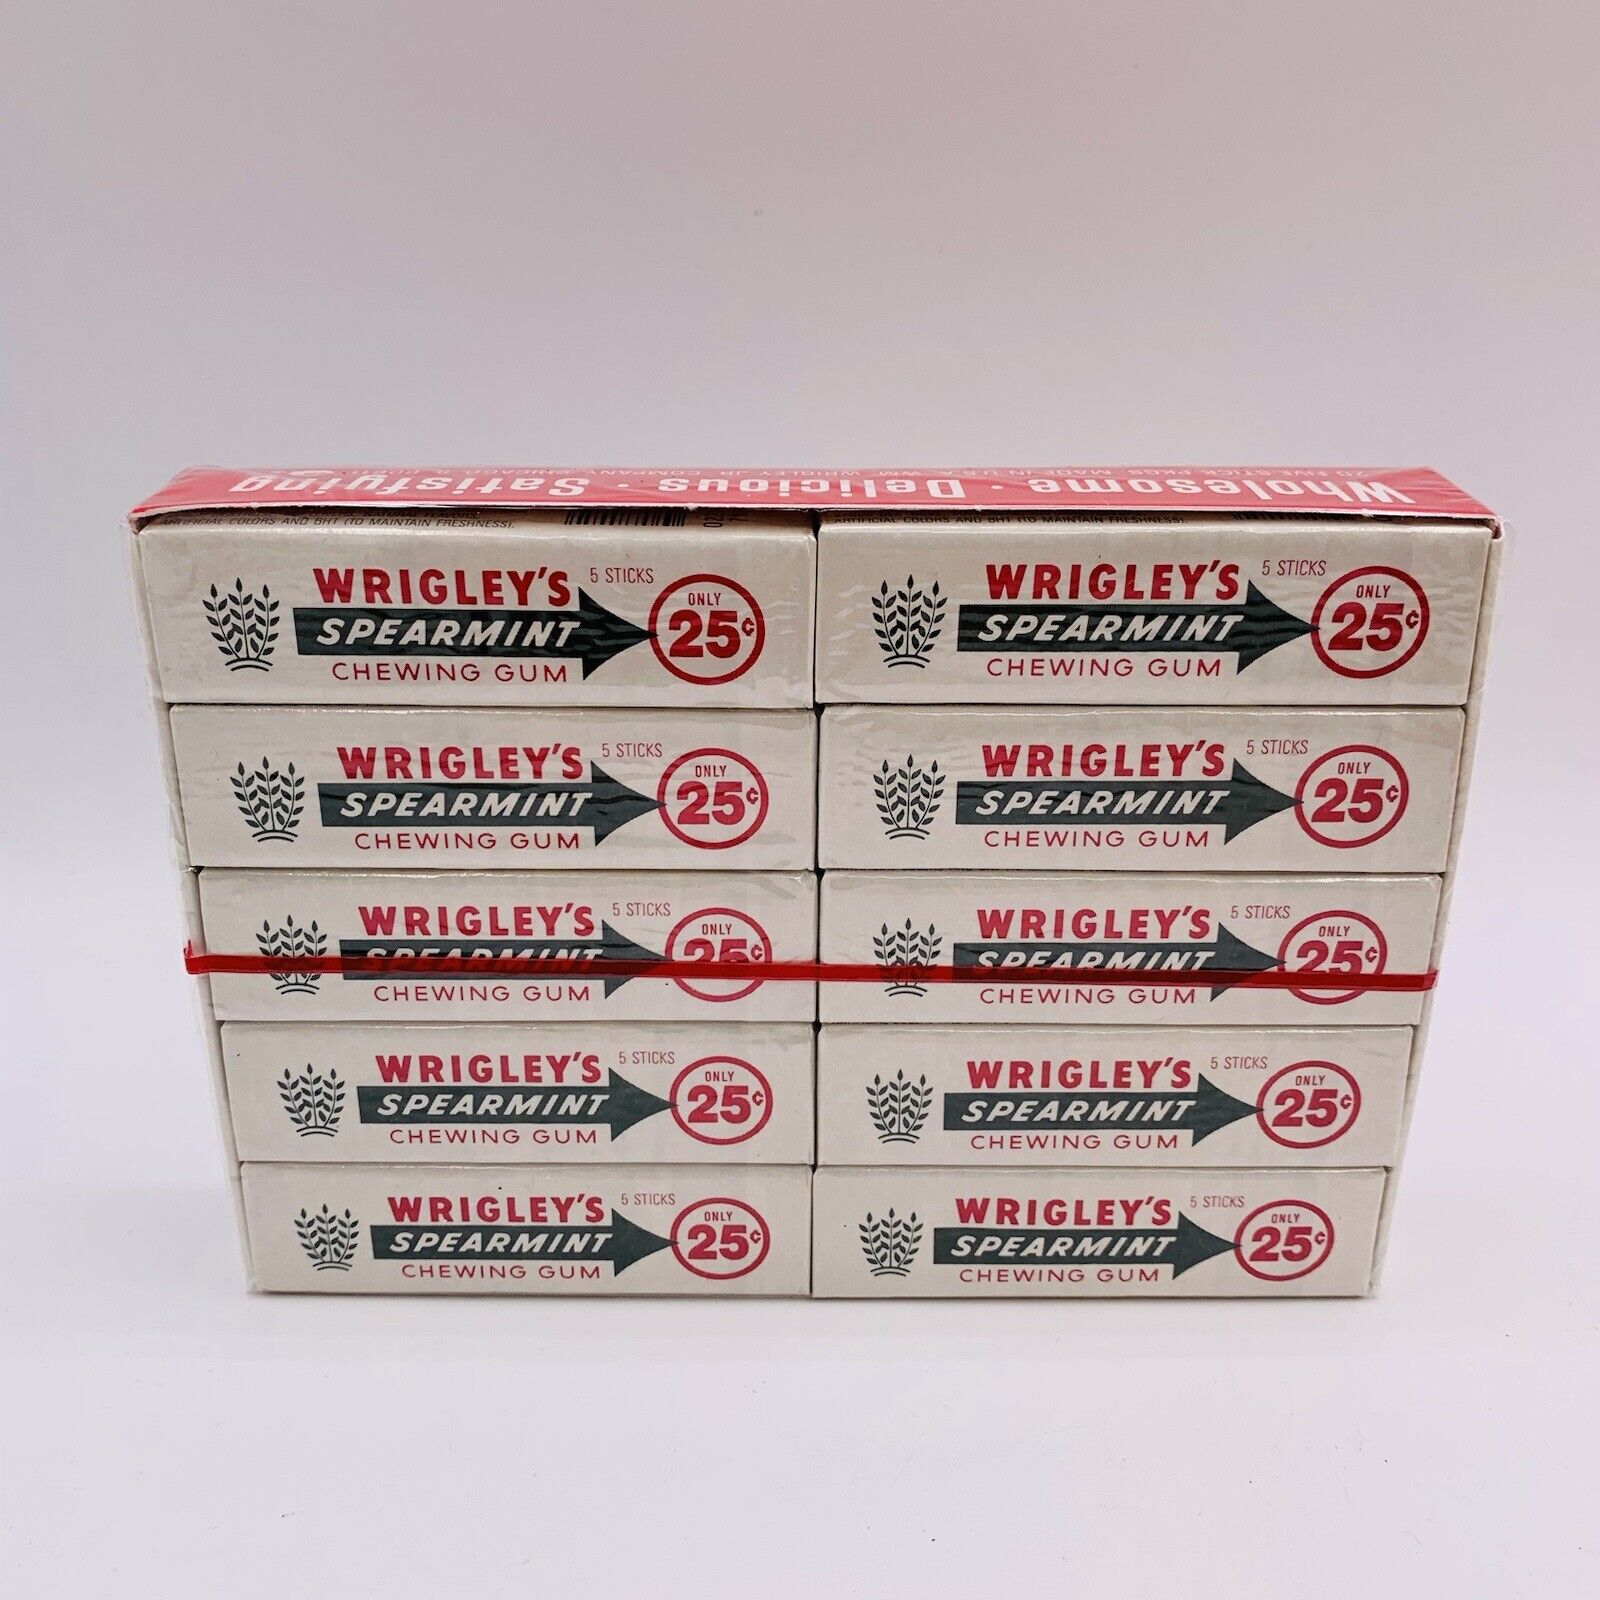 Vintage Wrigleys Spearmint Chewing Gum SEALED CASE OF 20 PACKS 1980s 25 Cents